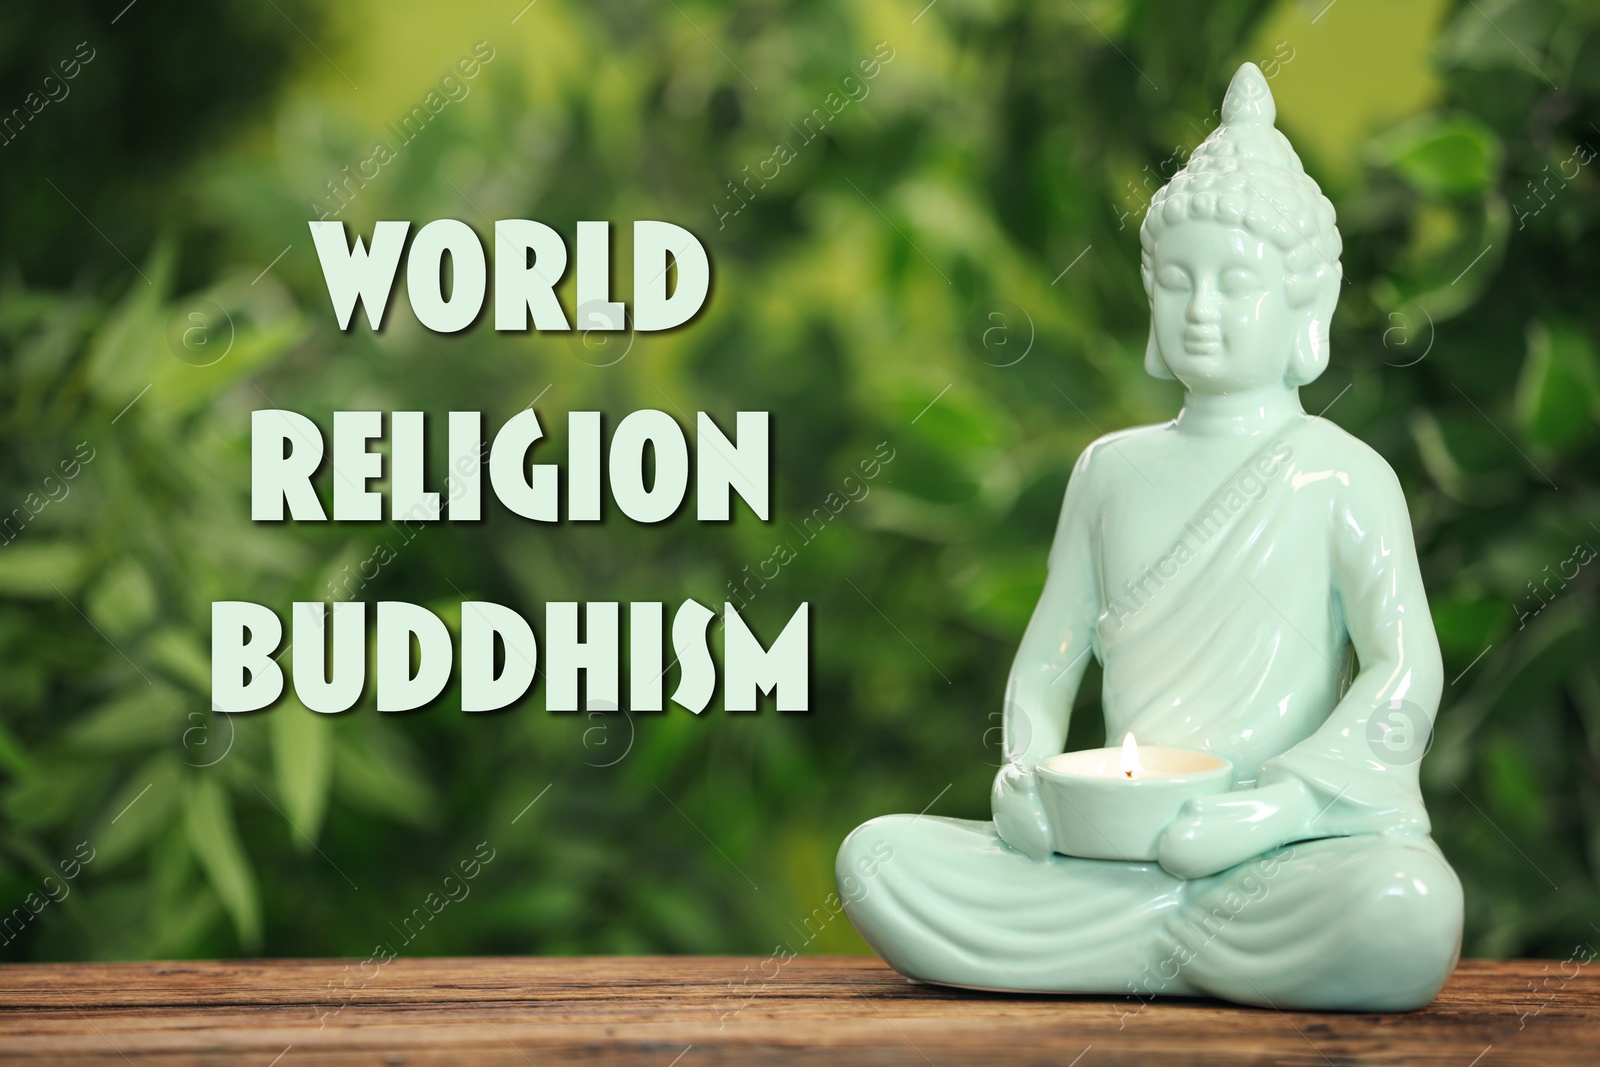 Image of Buddha statue with burning candle on wooden table and text World Religion Buddhism